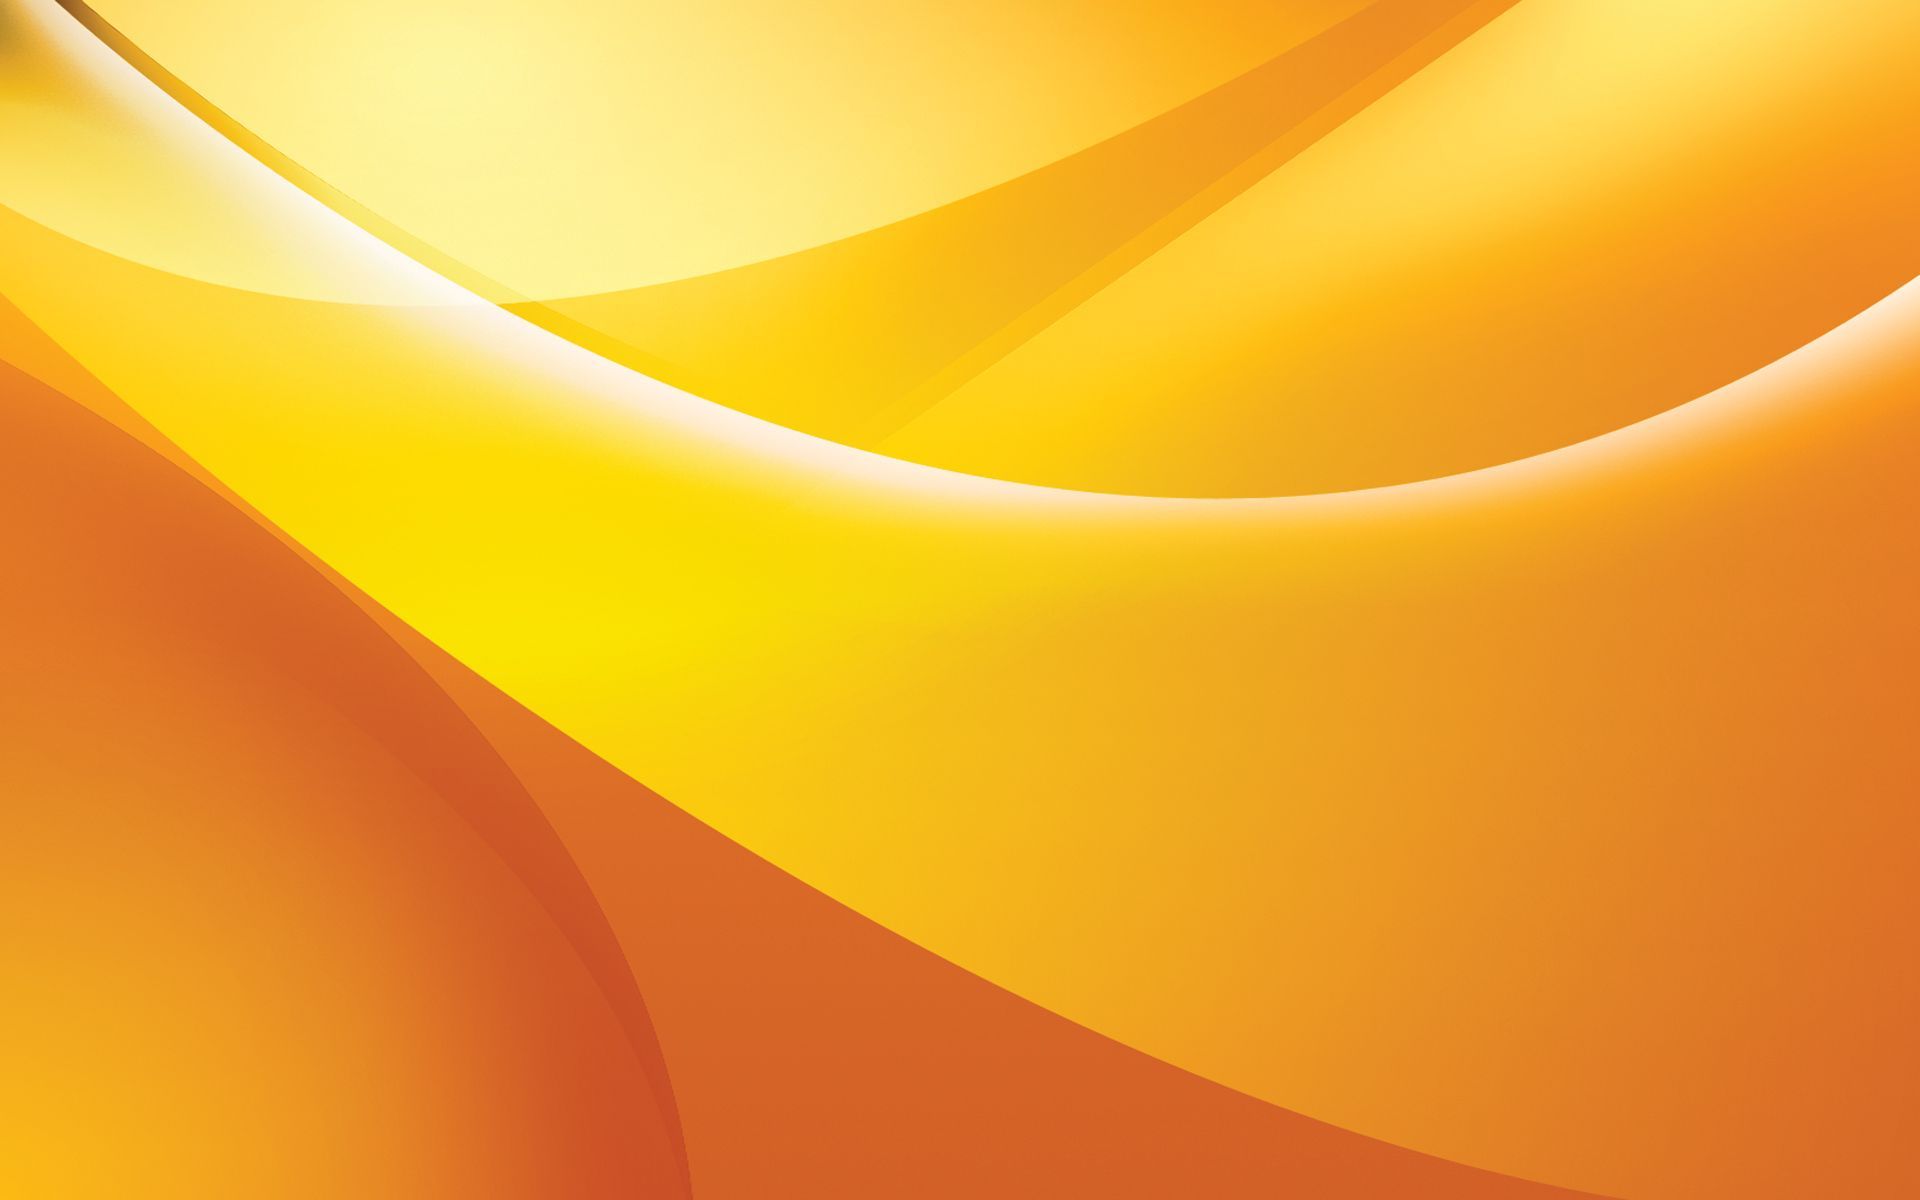 Awesome Abstract Yellow Orange Art HD Wallpaper For Desktop